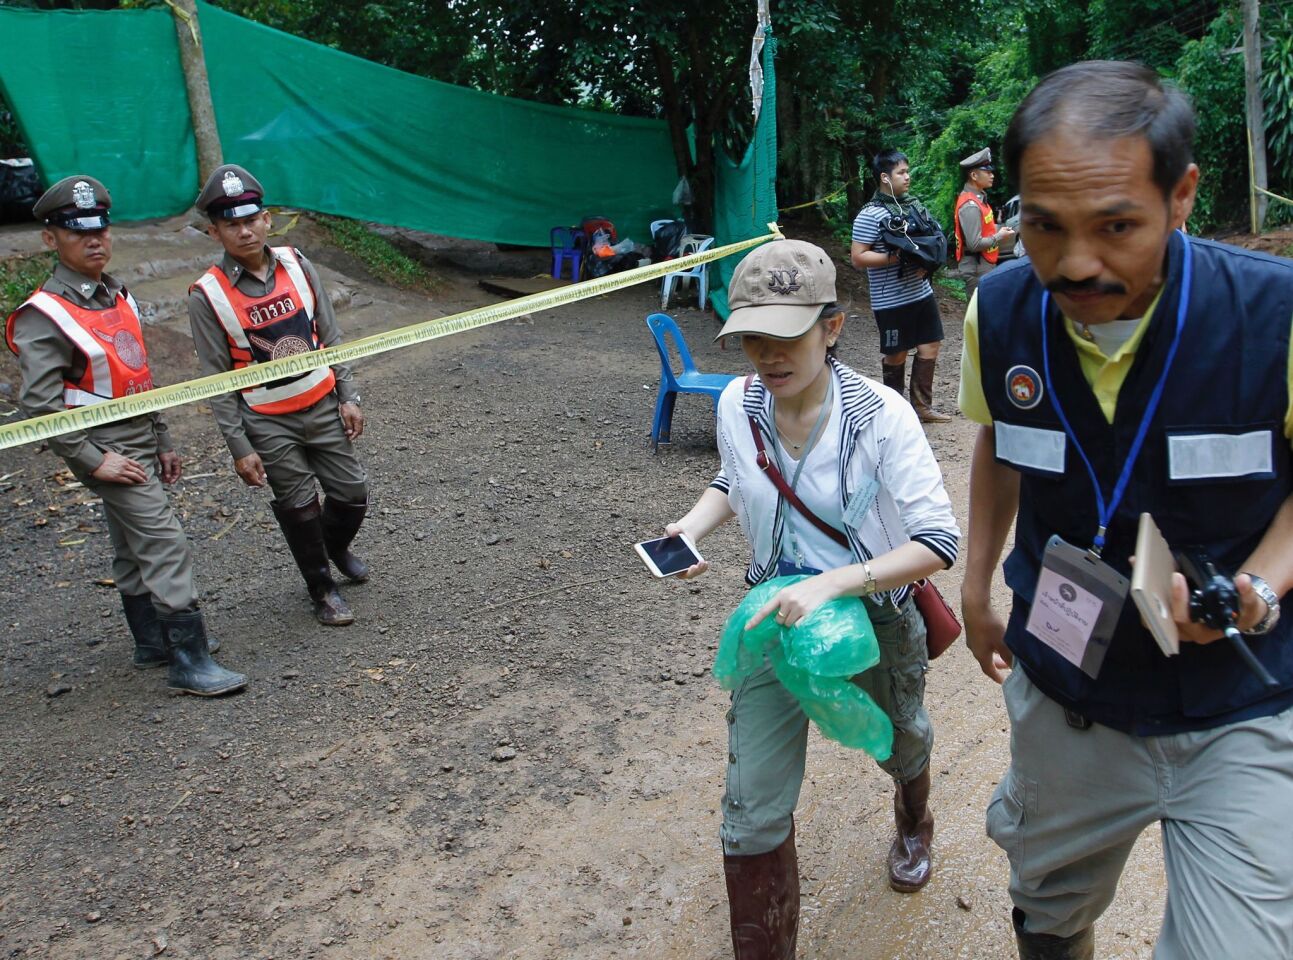 A relative of one of the trapped boys goes to meet with officers during the rescue operation Sunday at Tham Luang cave.